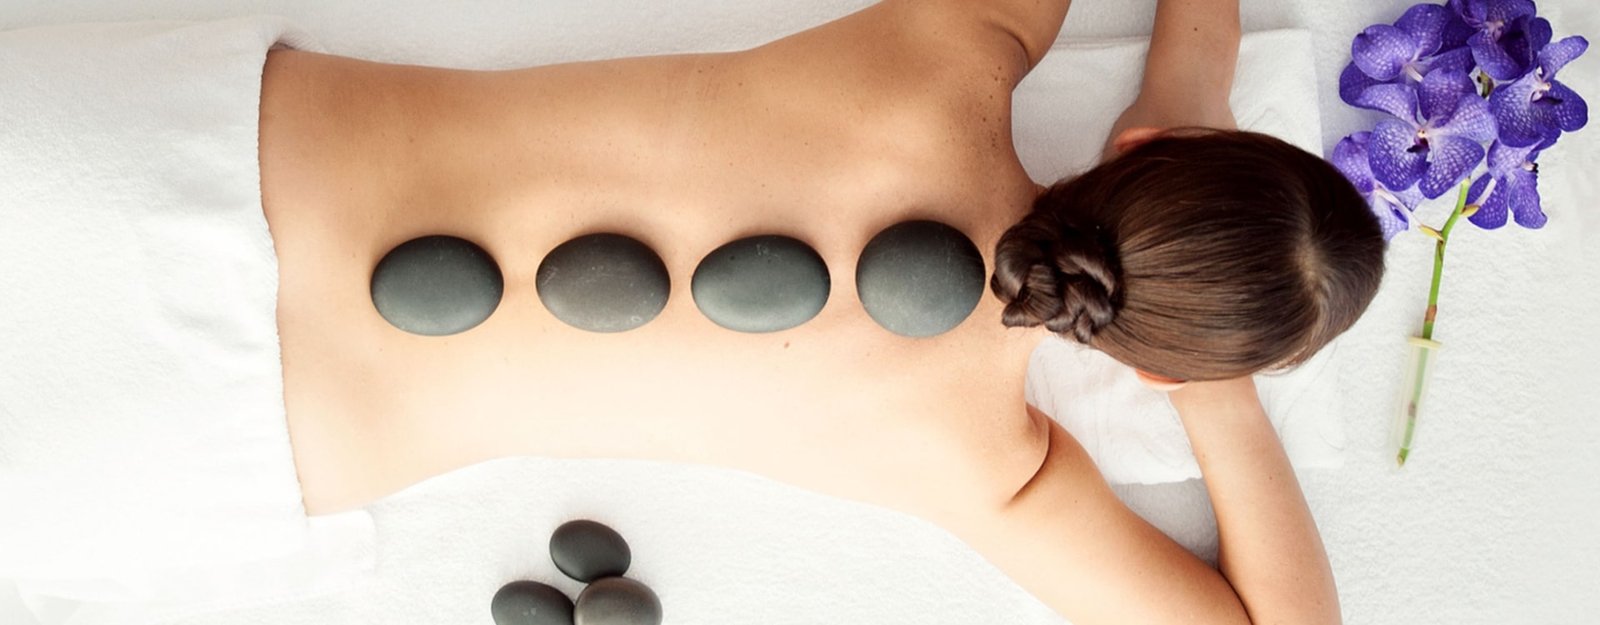 Hot Stone Massage Massage Therapy And Health Treatment In Colchester Essex